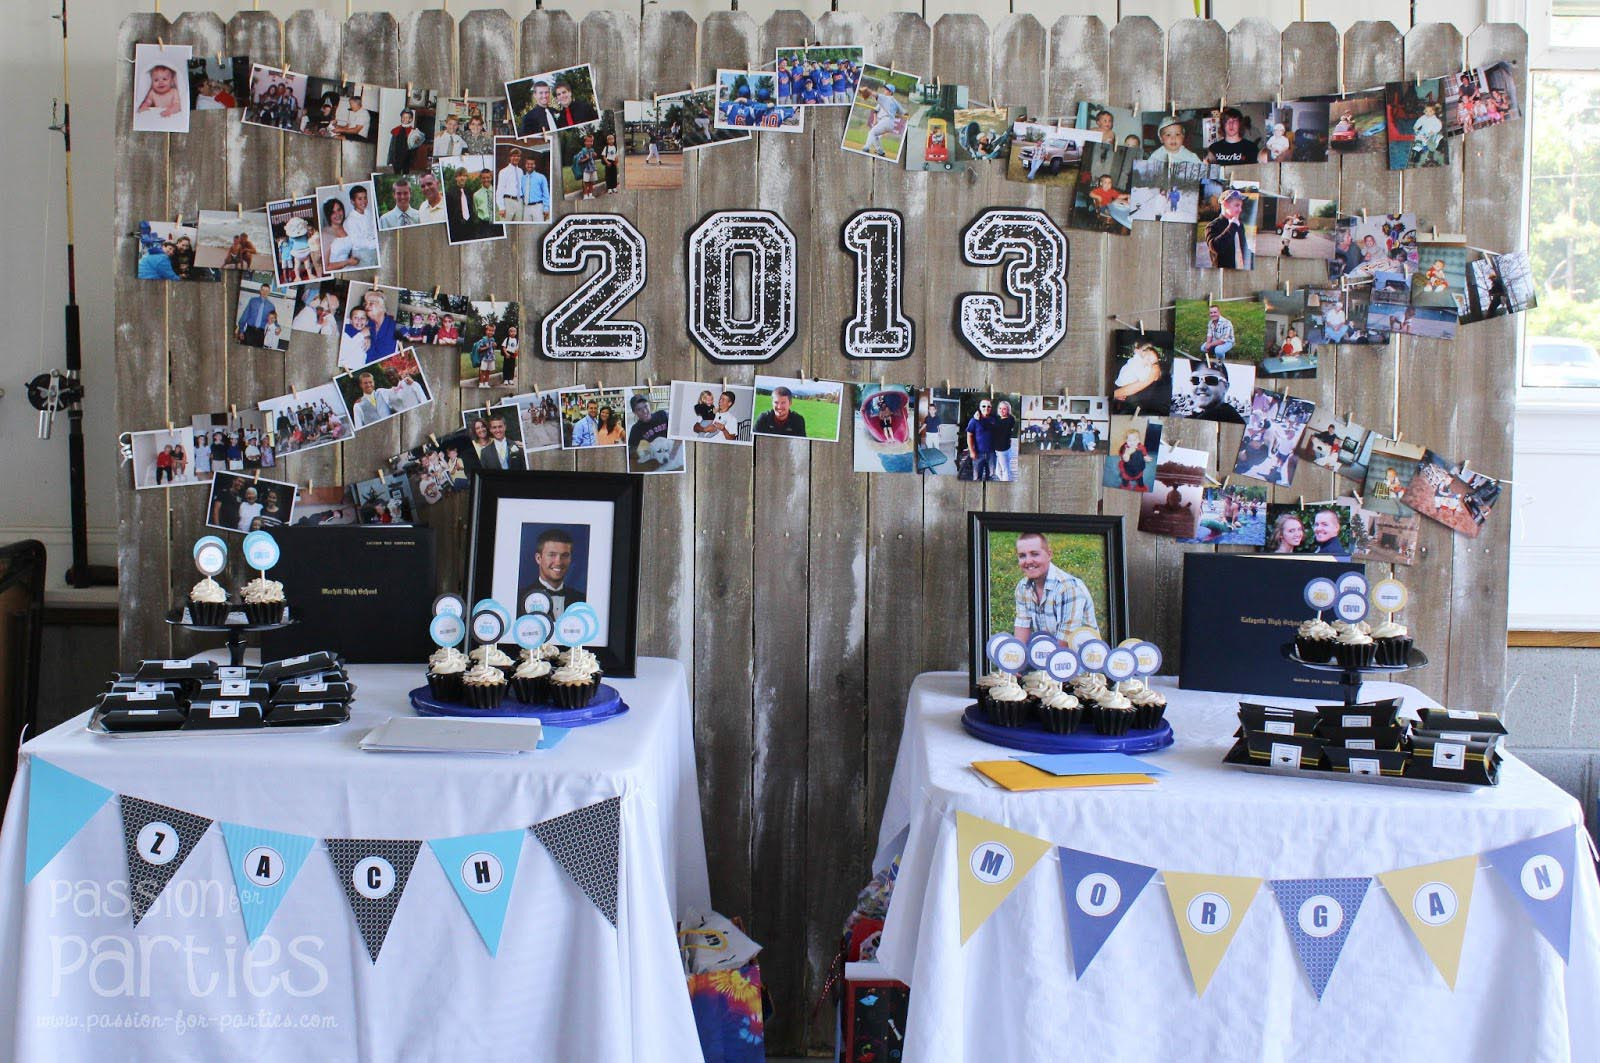 Ideas For Decorating For A Graduation Party
 High School Graduation Party Theme Ideas